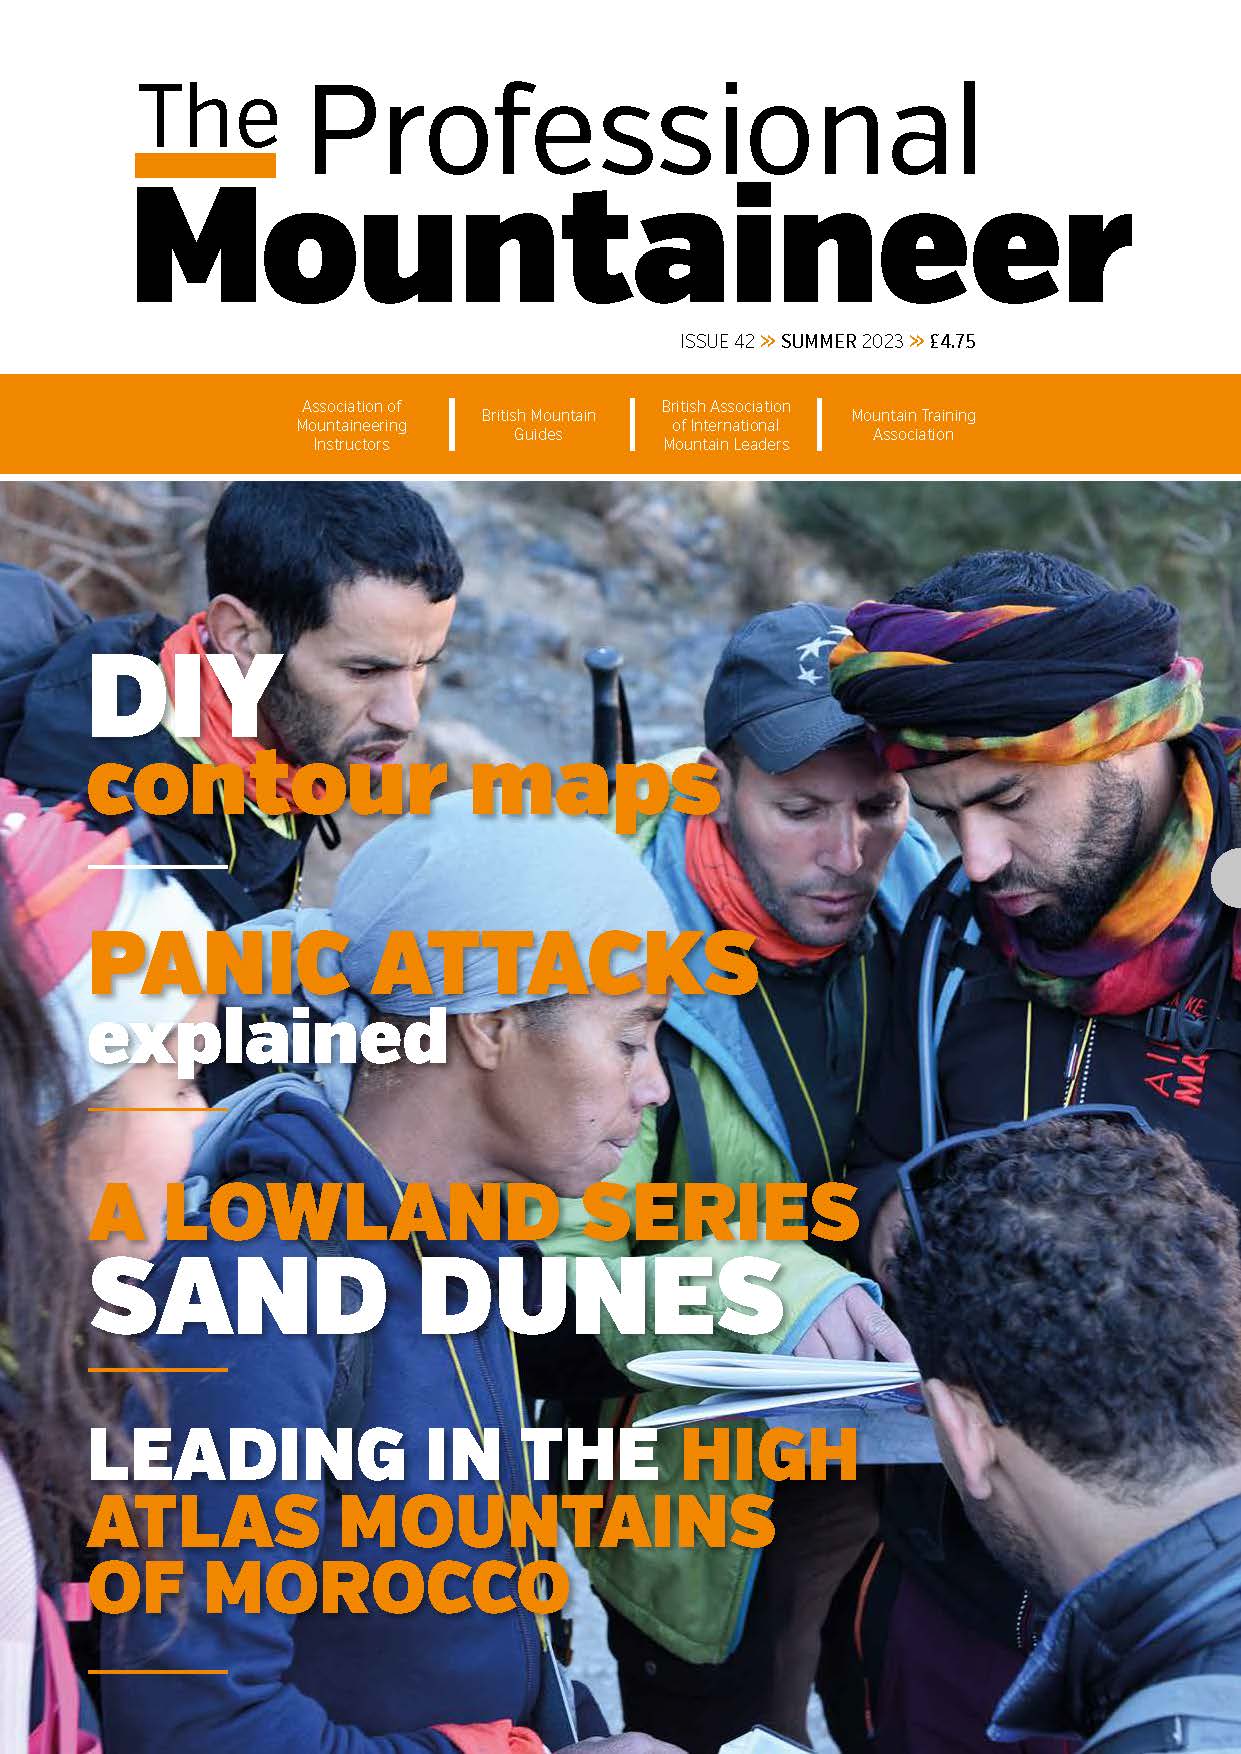 The Professional Mountaineer Magazine Summer 2023 Cover Image